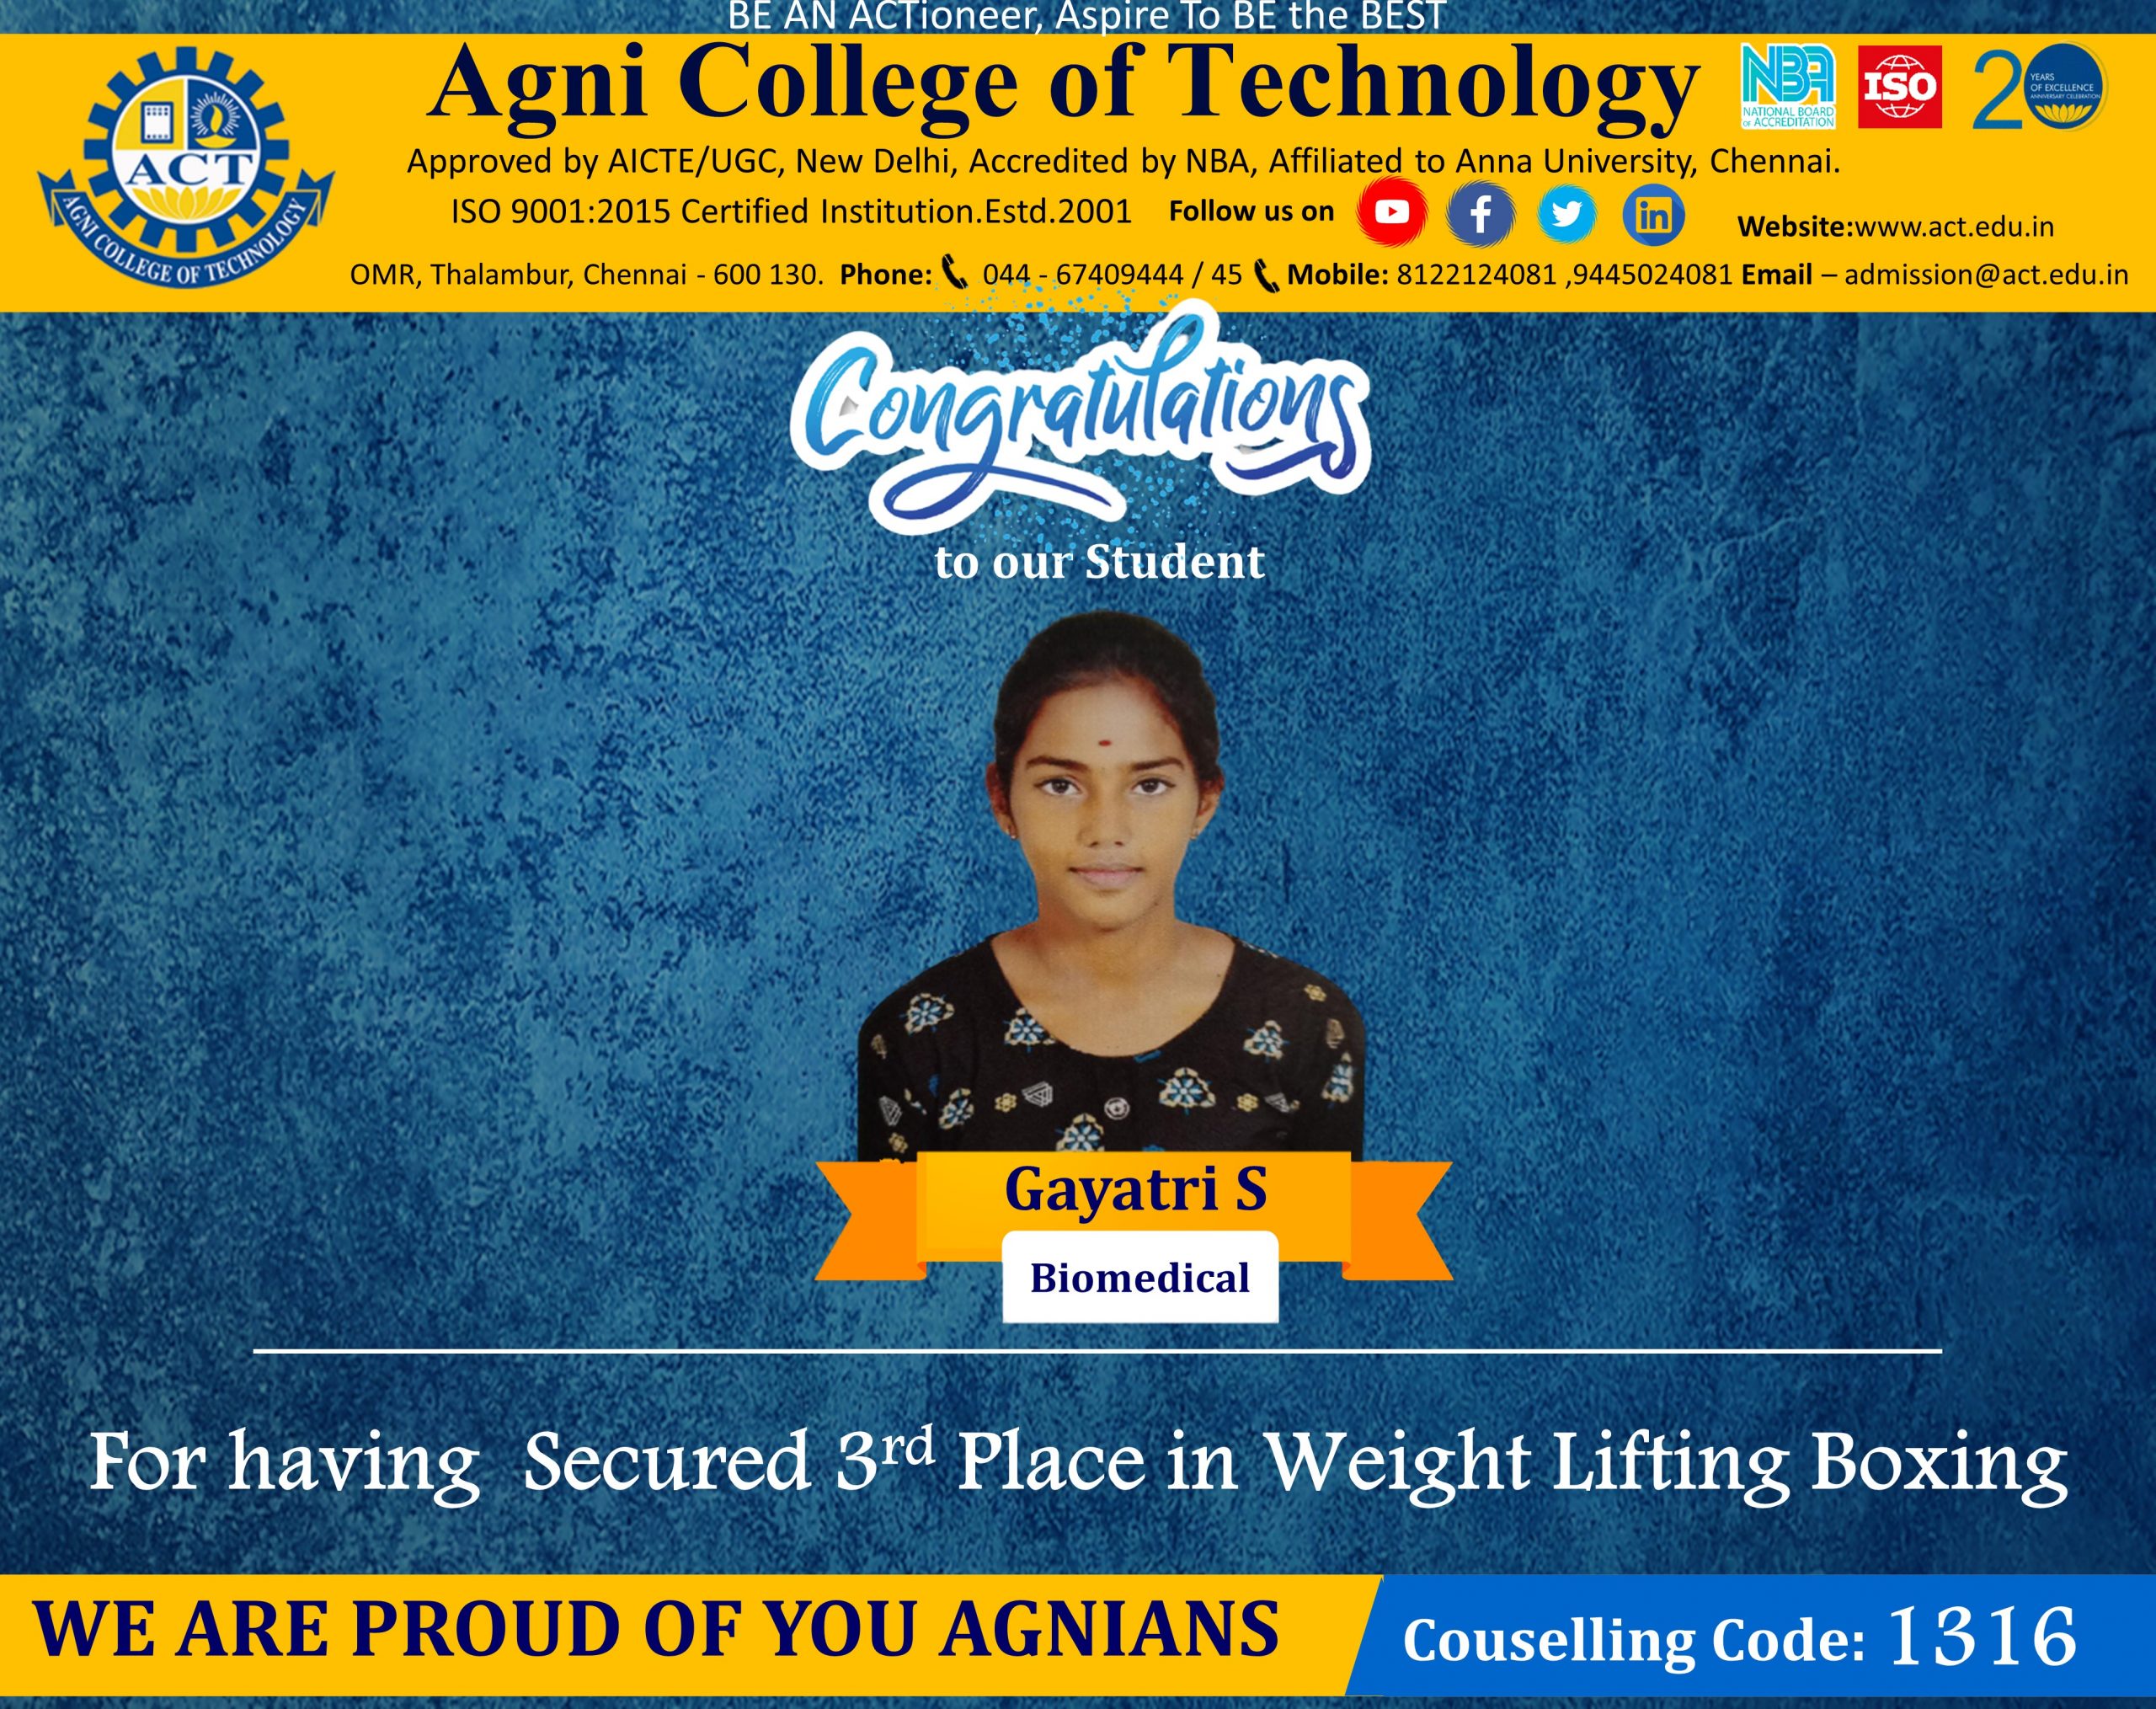 Student from ACT Won Third Prize in Tamilnadu State Level Lifting Championship